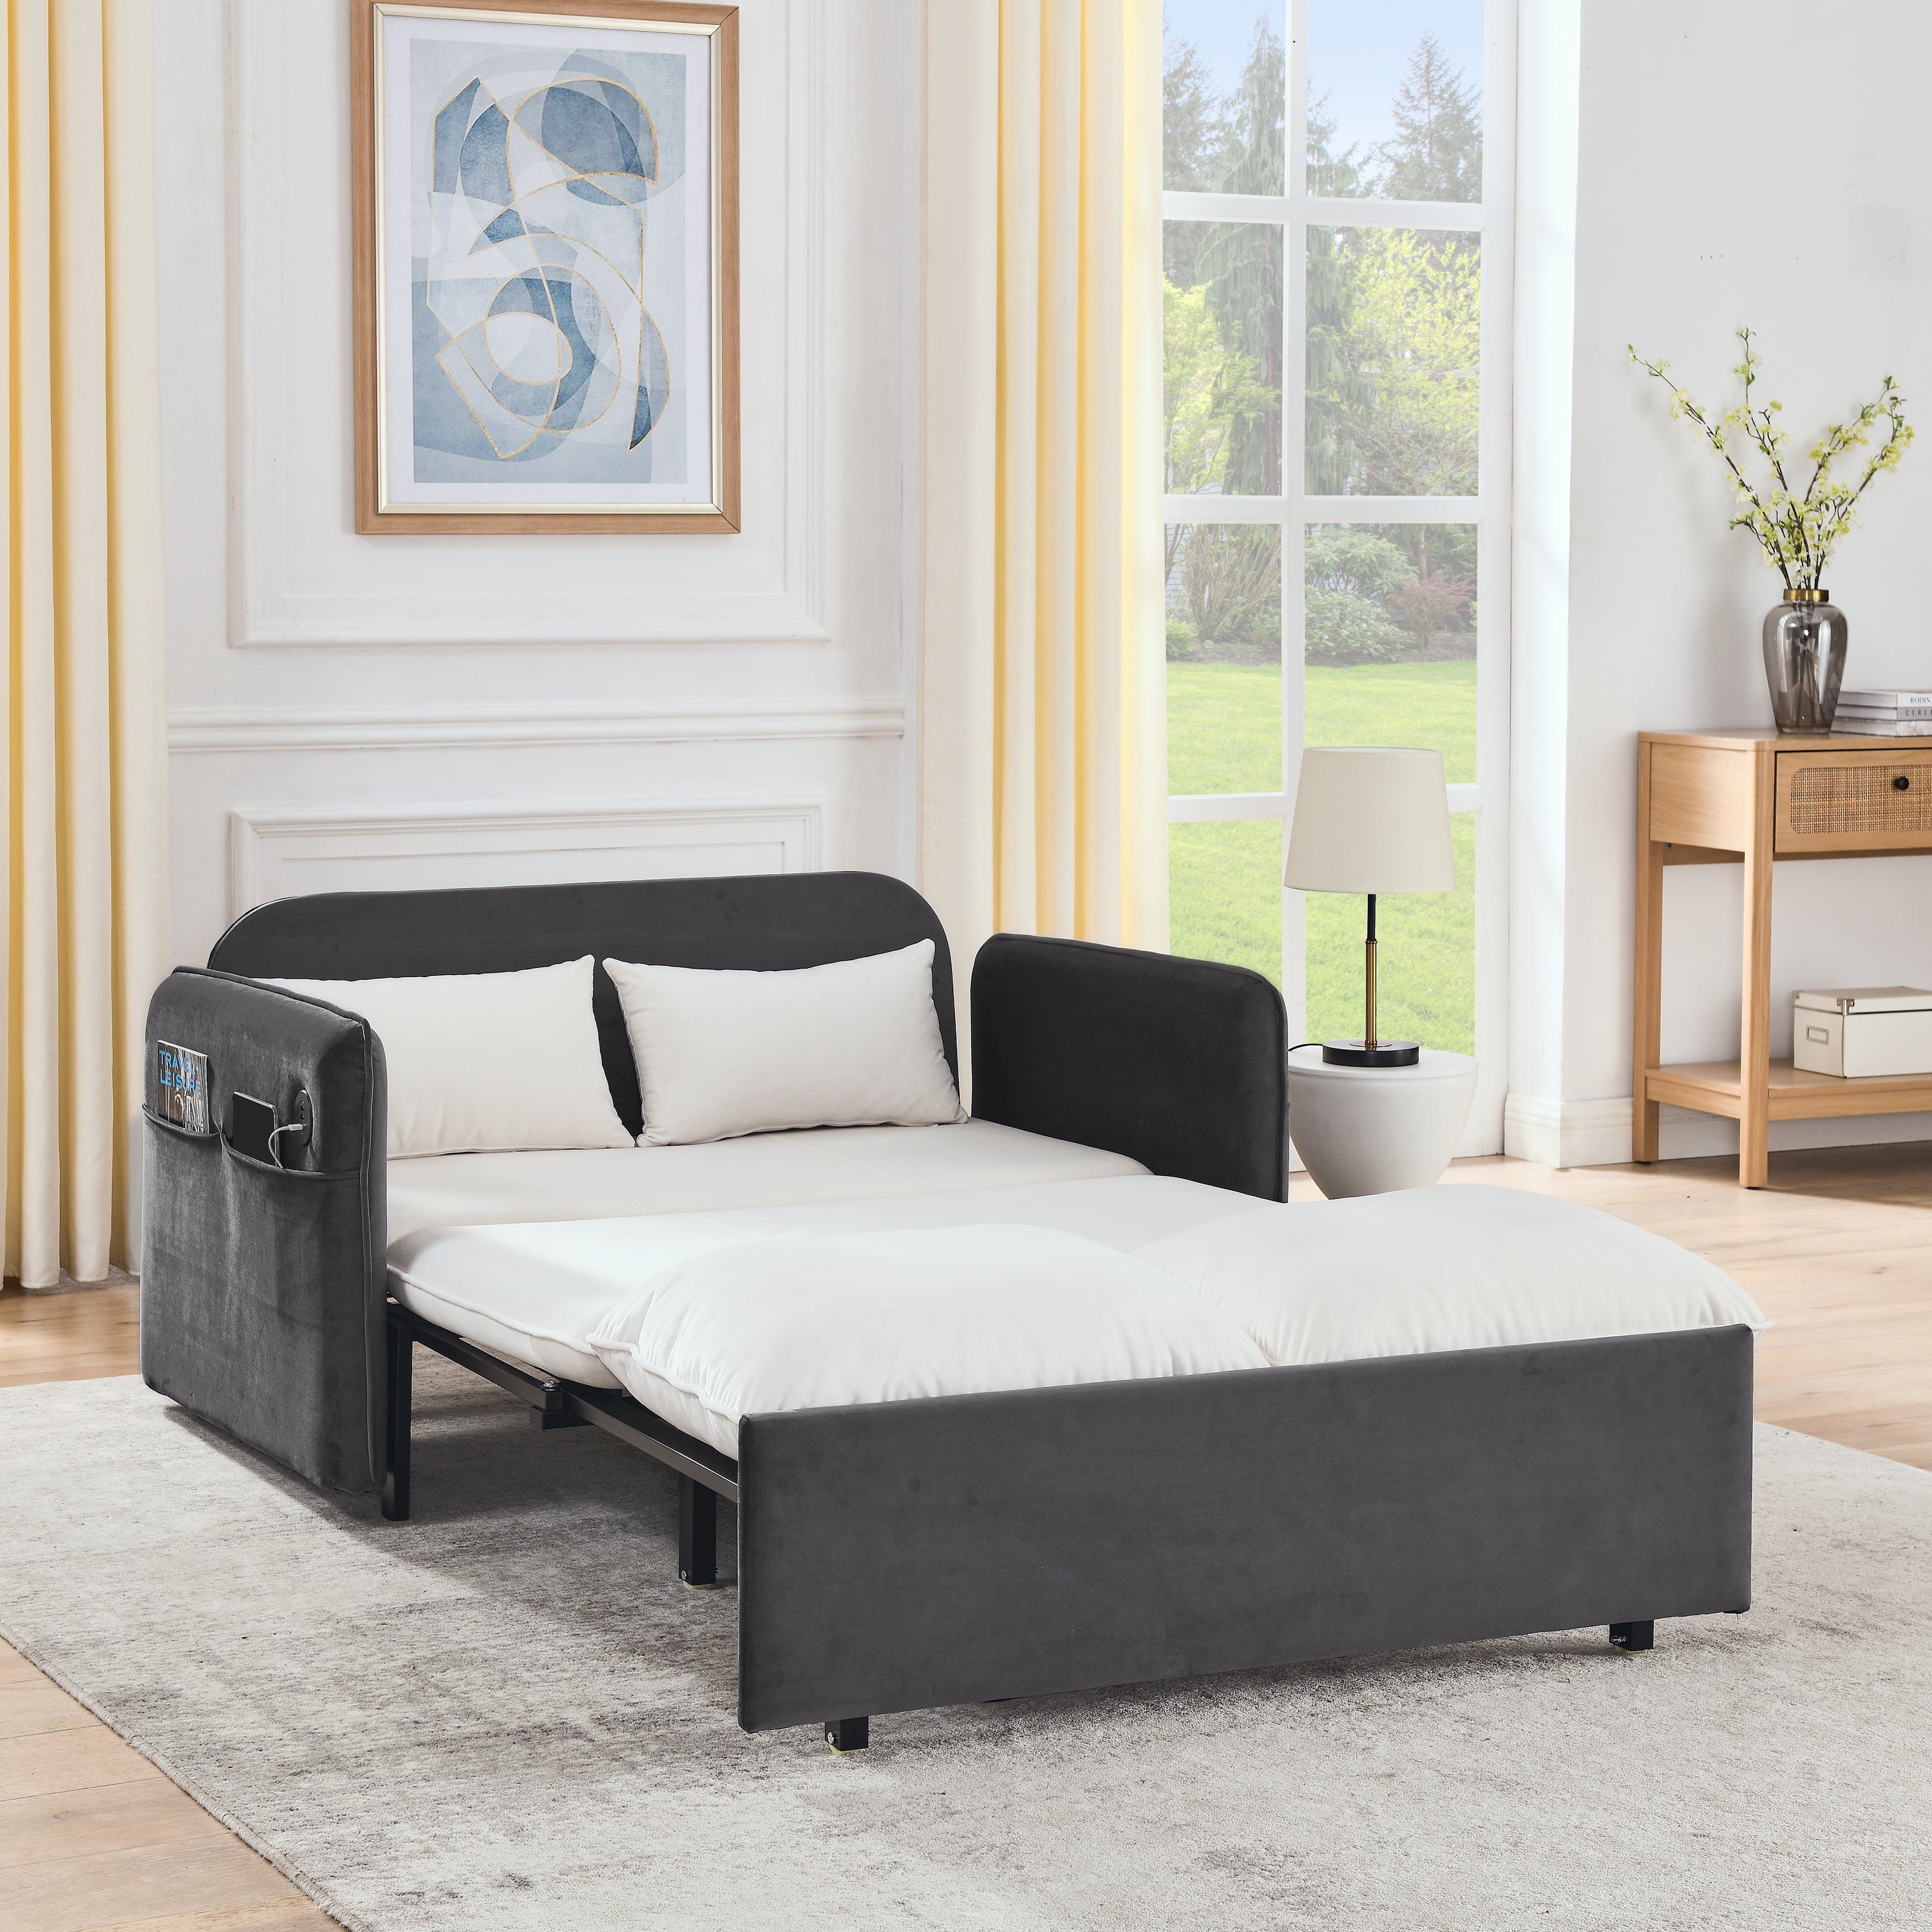 🆓🚛 53" Modern Convertible Sofa Bed W/2 Removable Armrests W/Usb Power Port, Velvet Recliner Adjustable Sofa W/Head Pull-Out Bed, 2 Pillows, for Living Room, White-Gray